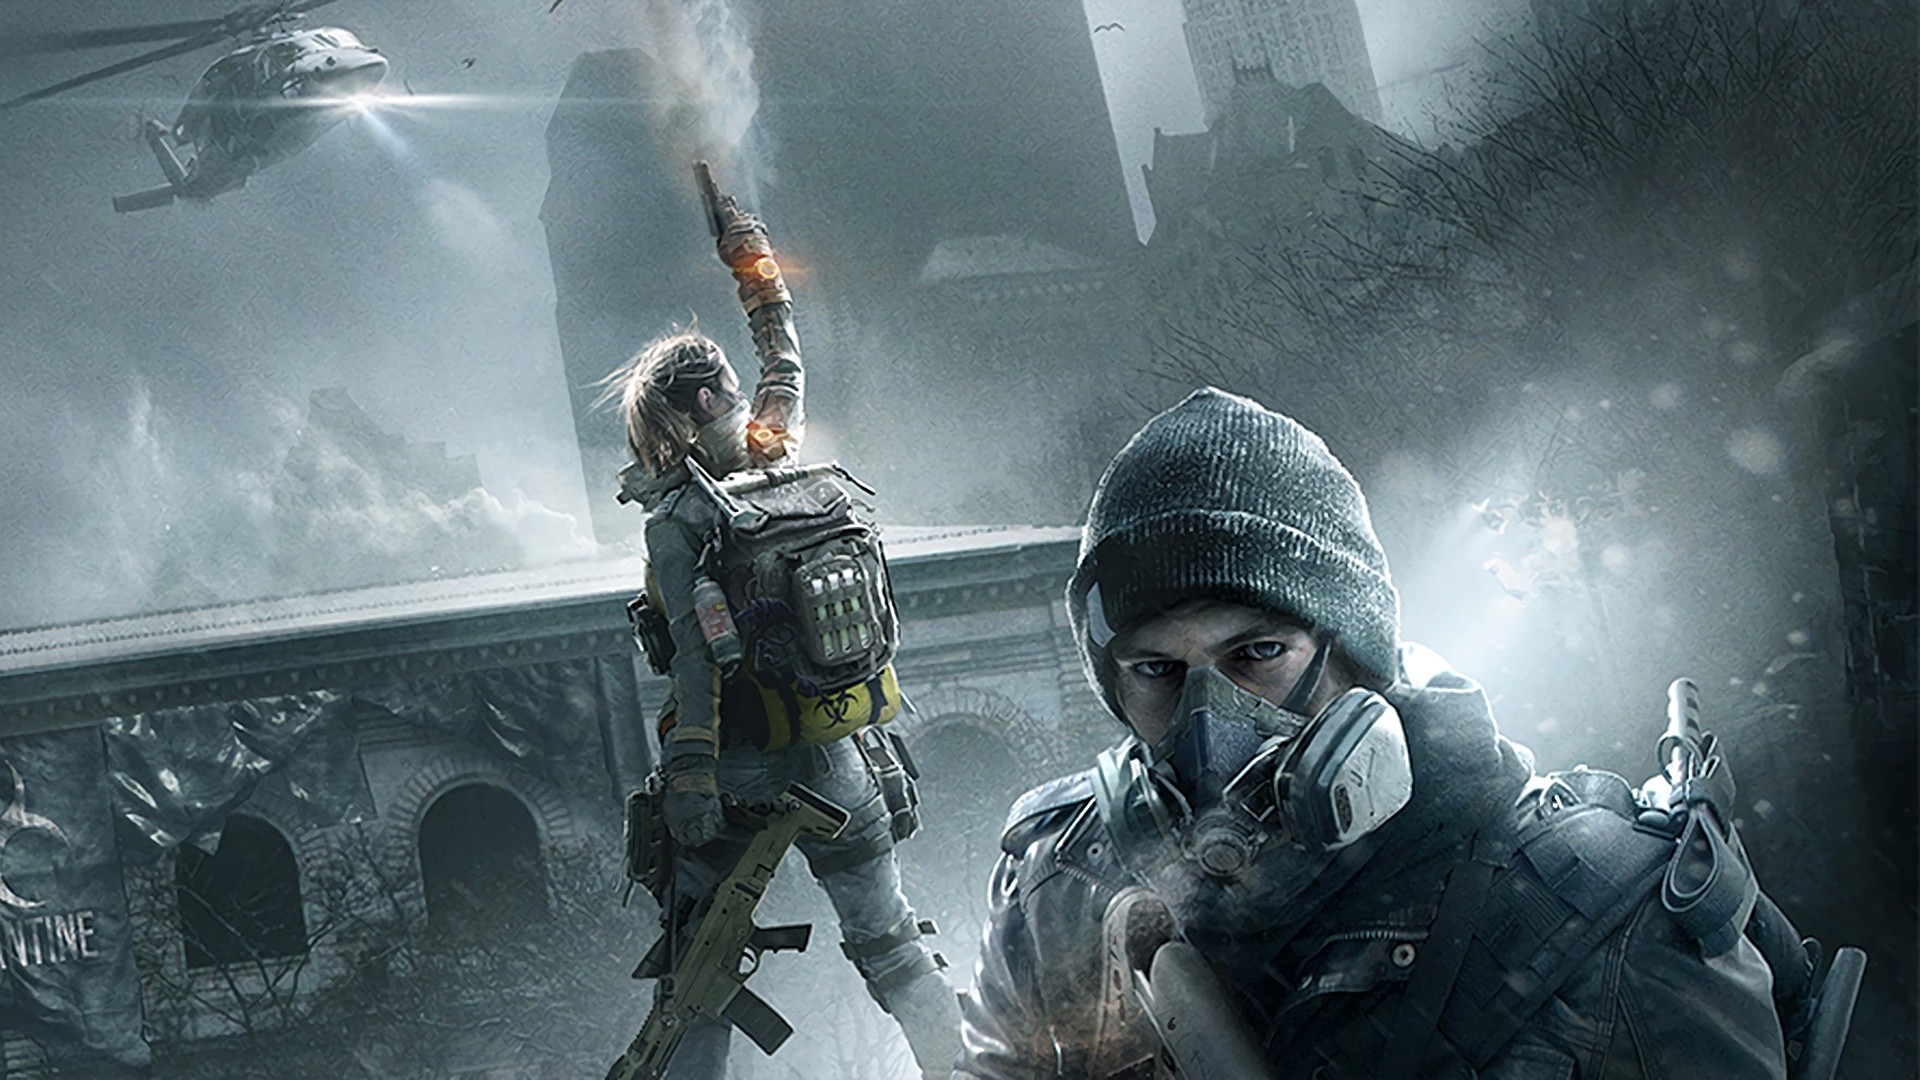 1920x1080 Tom Clancy's The Division HD Wallpaper | Hintergrund |  |  ID:720697 - Wallpaper Abyss